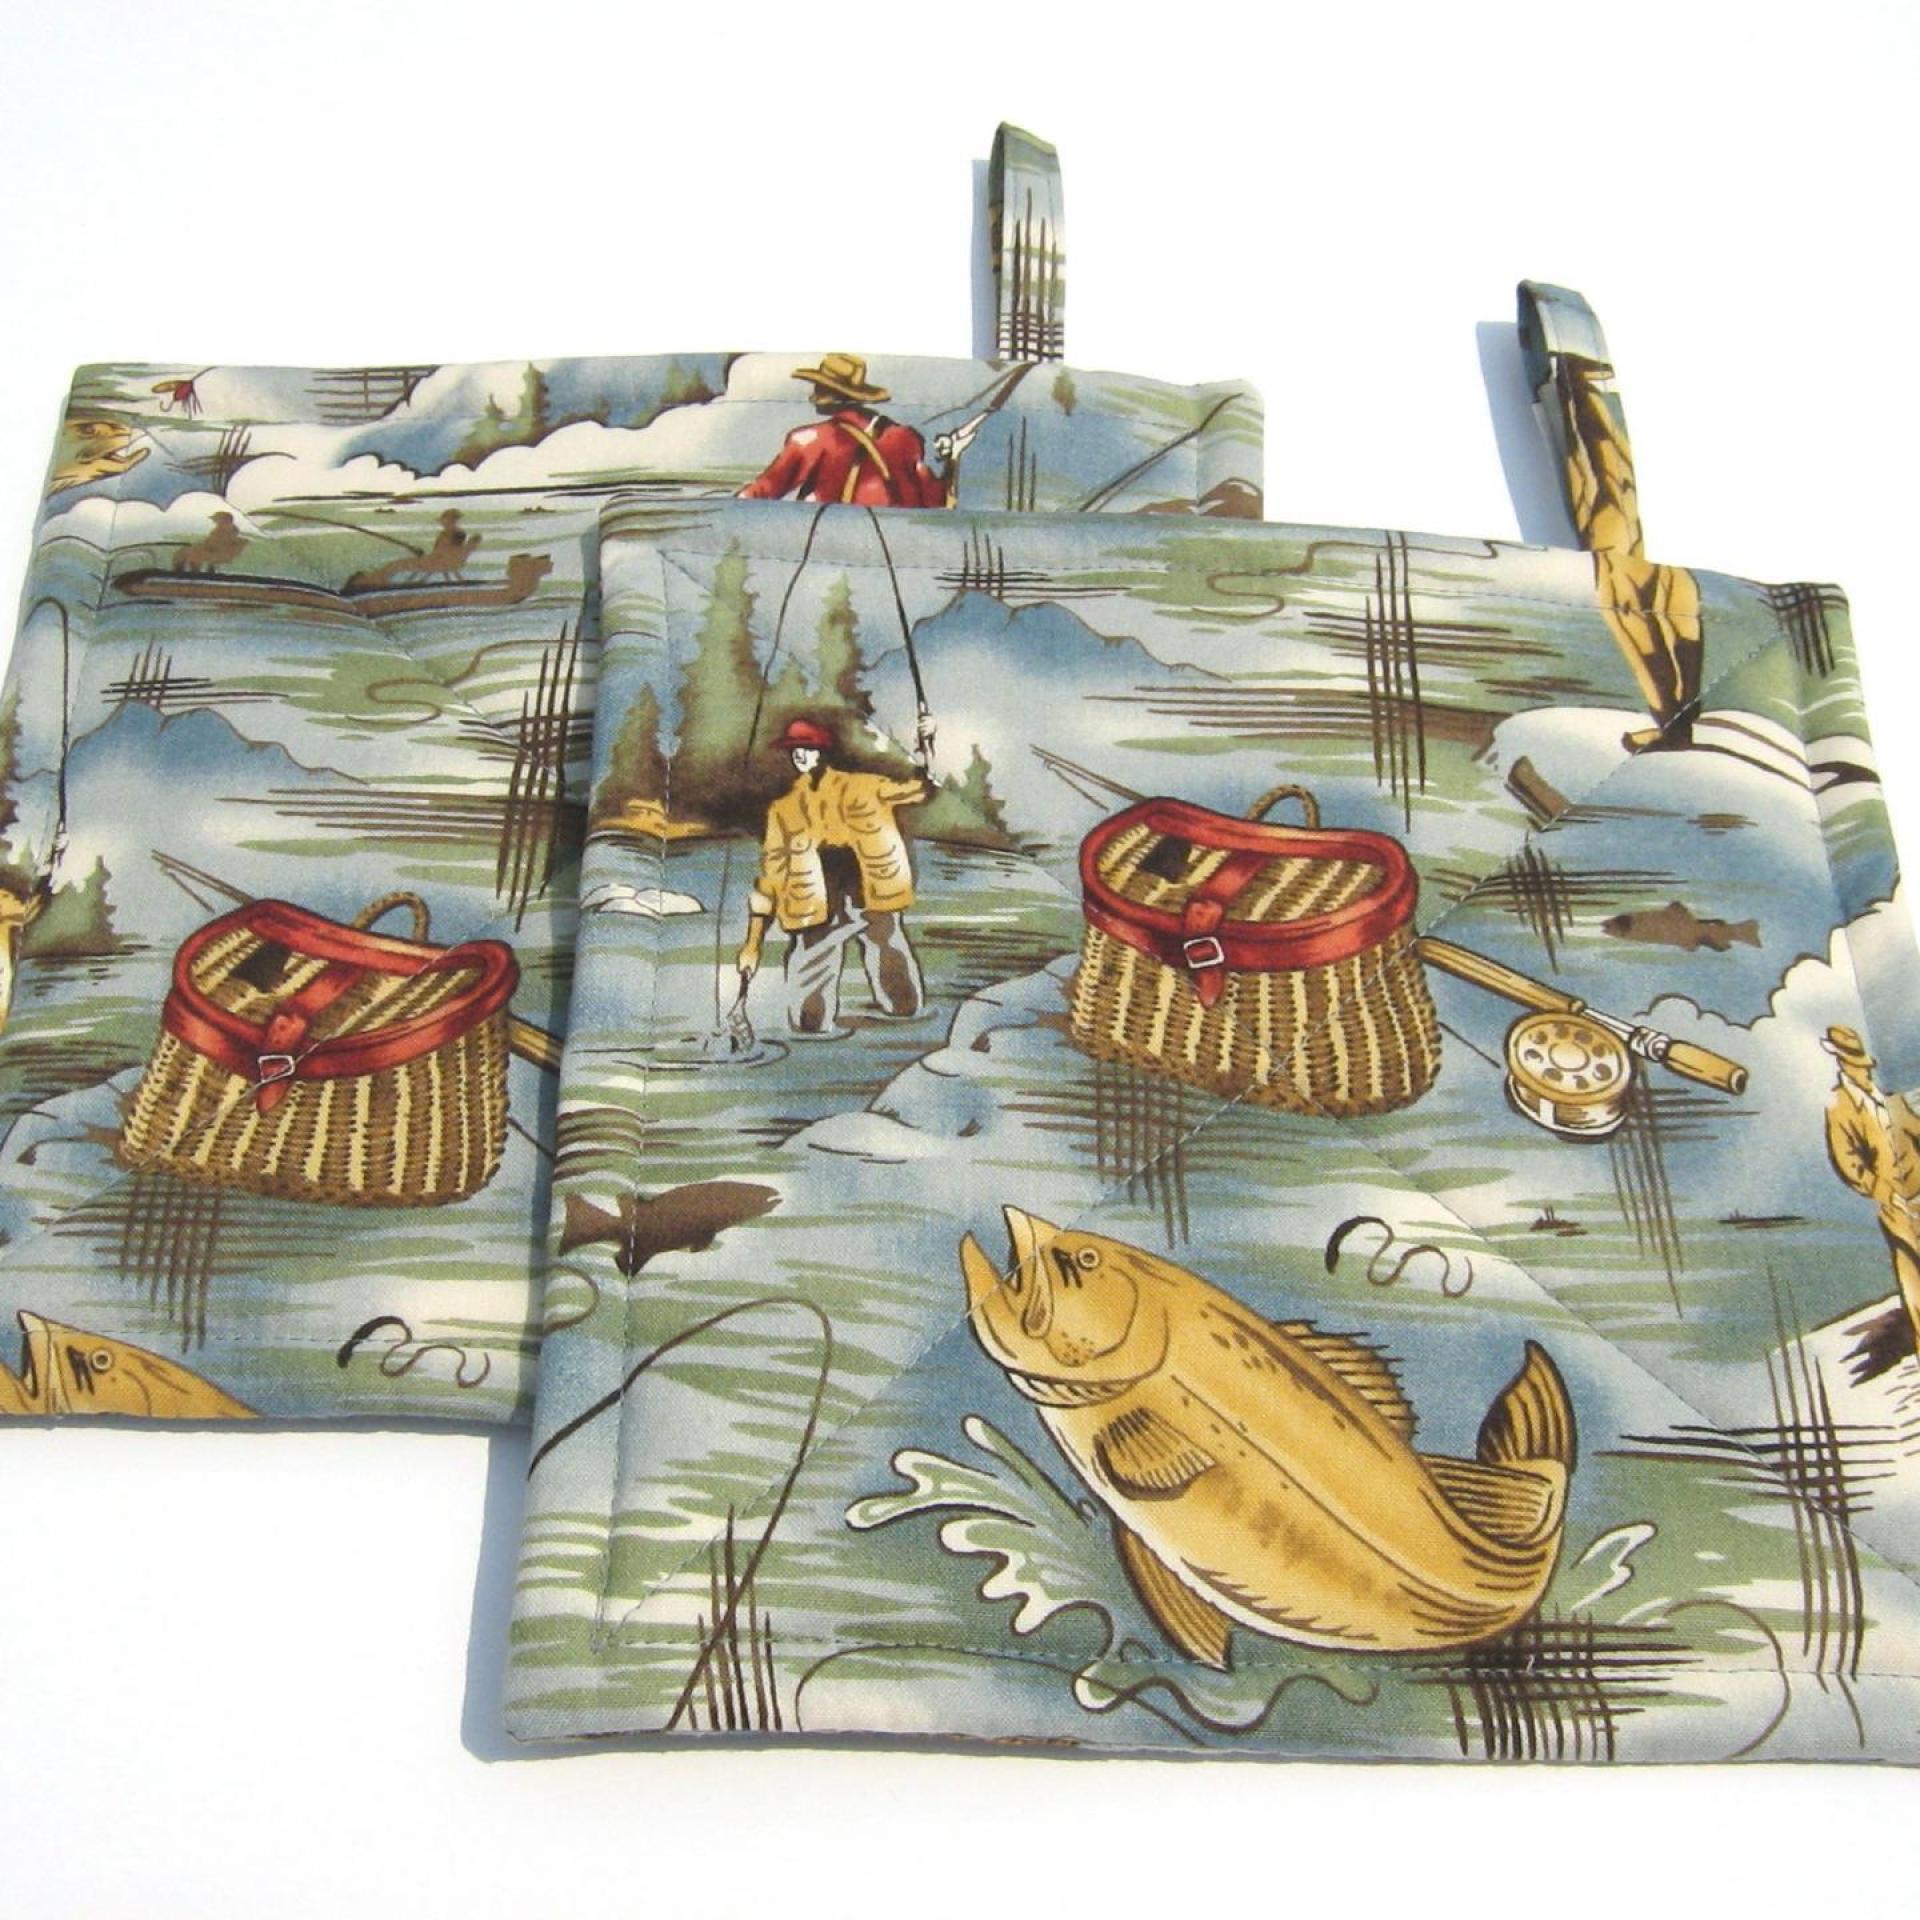 Fishing Potholders, Quilted Hot Pads Fisherman's Gift, Boat & Cabin Décor, Handmade Housewarming Gift